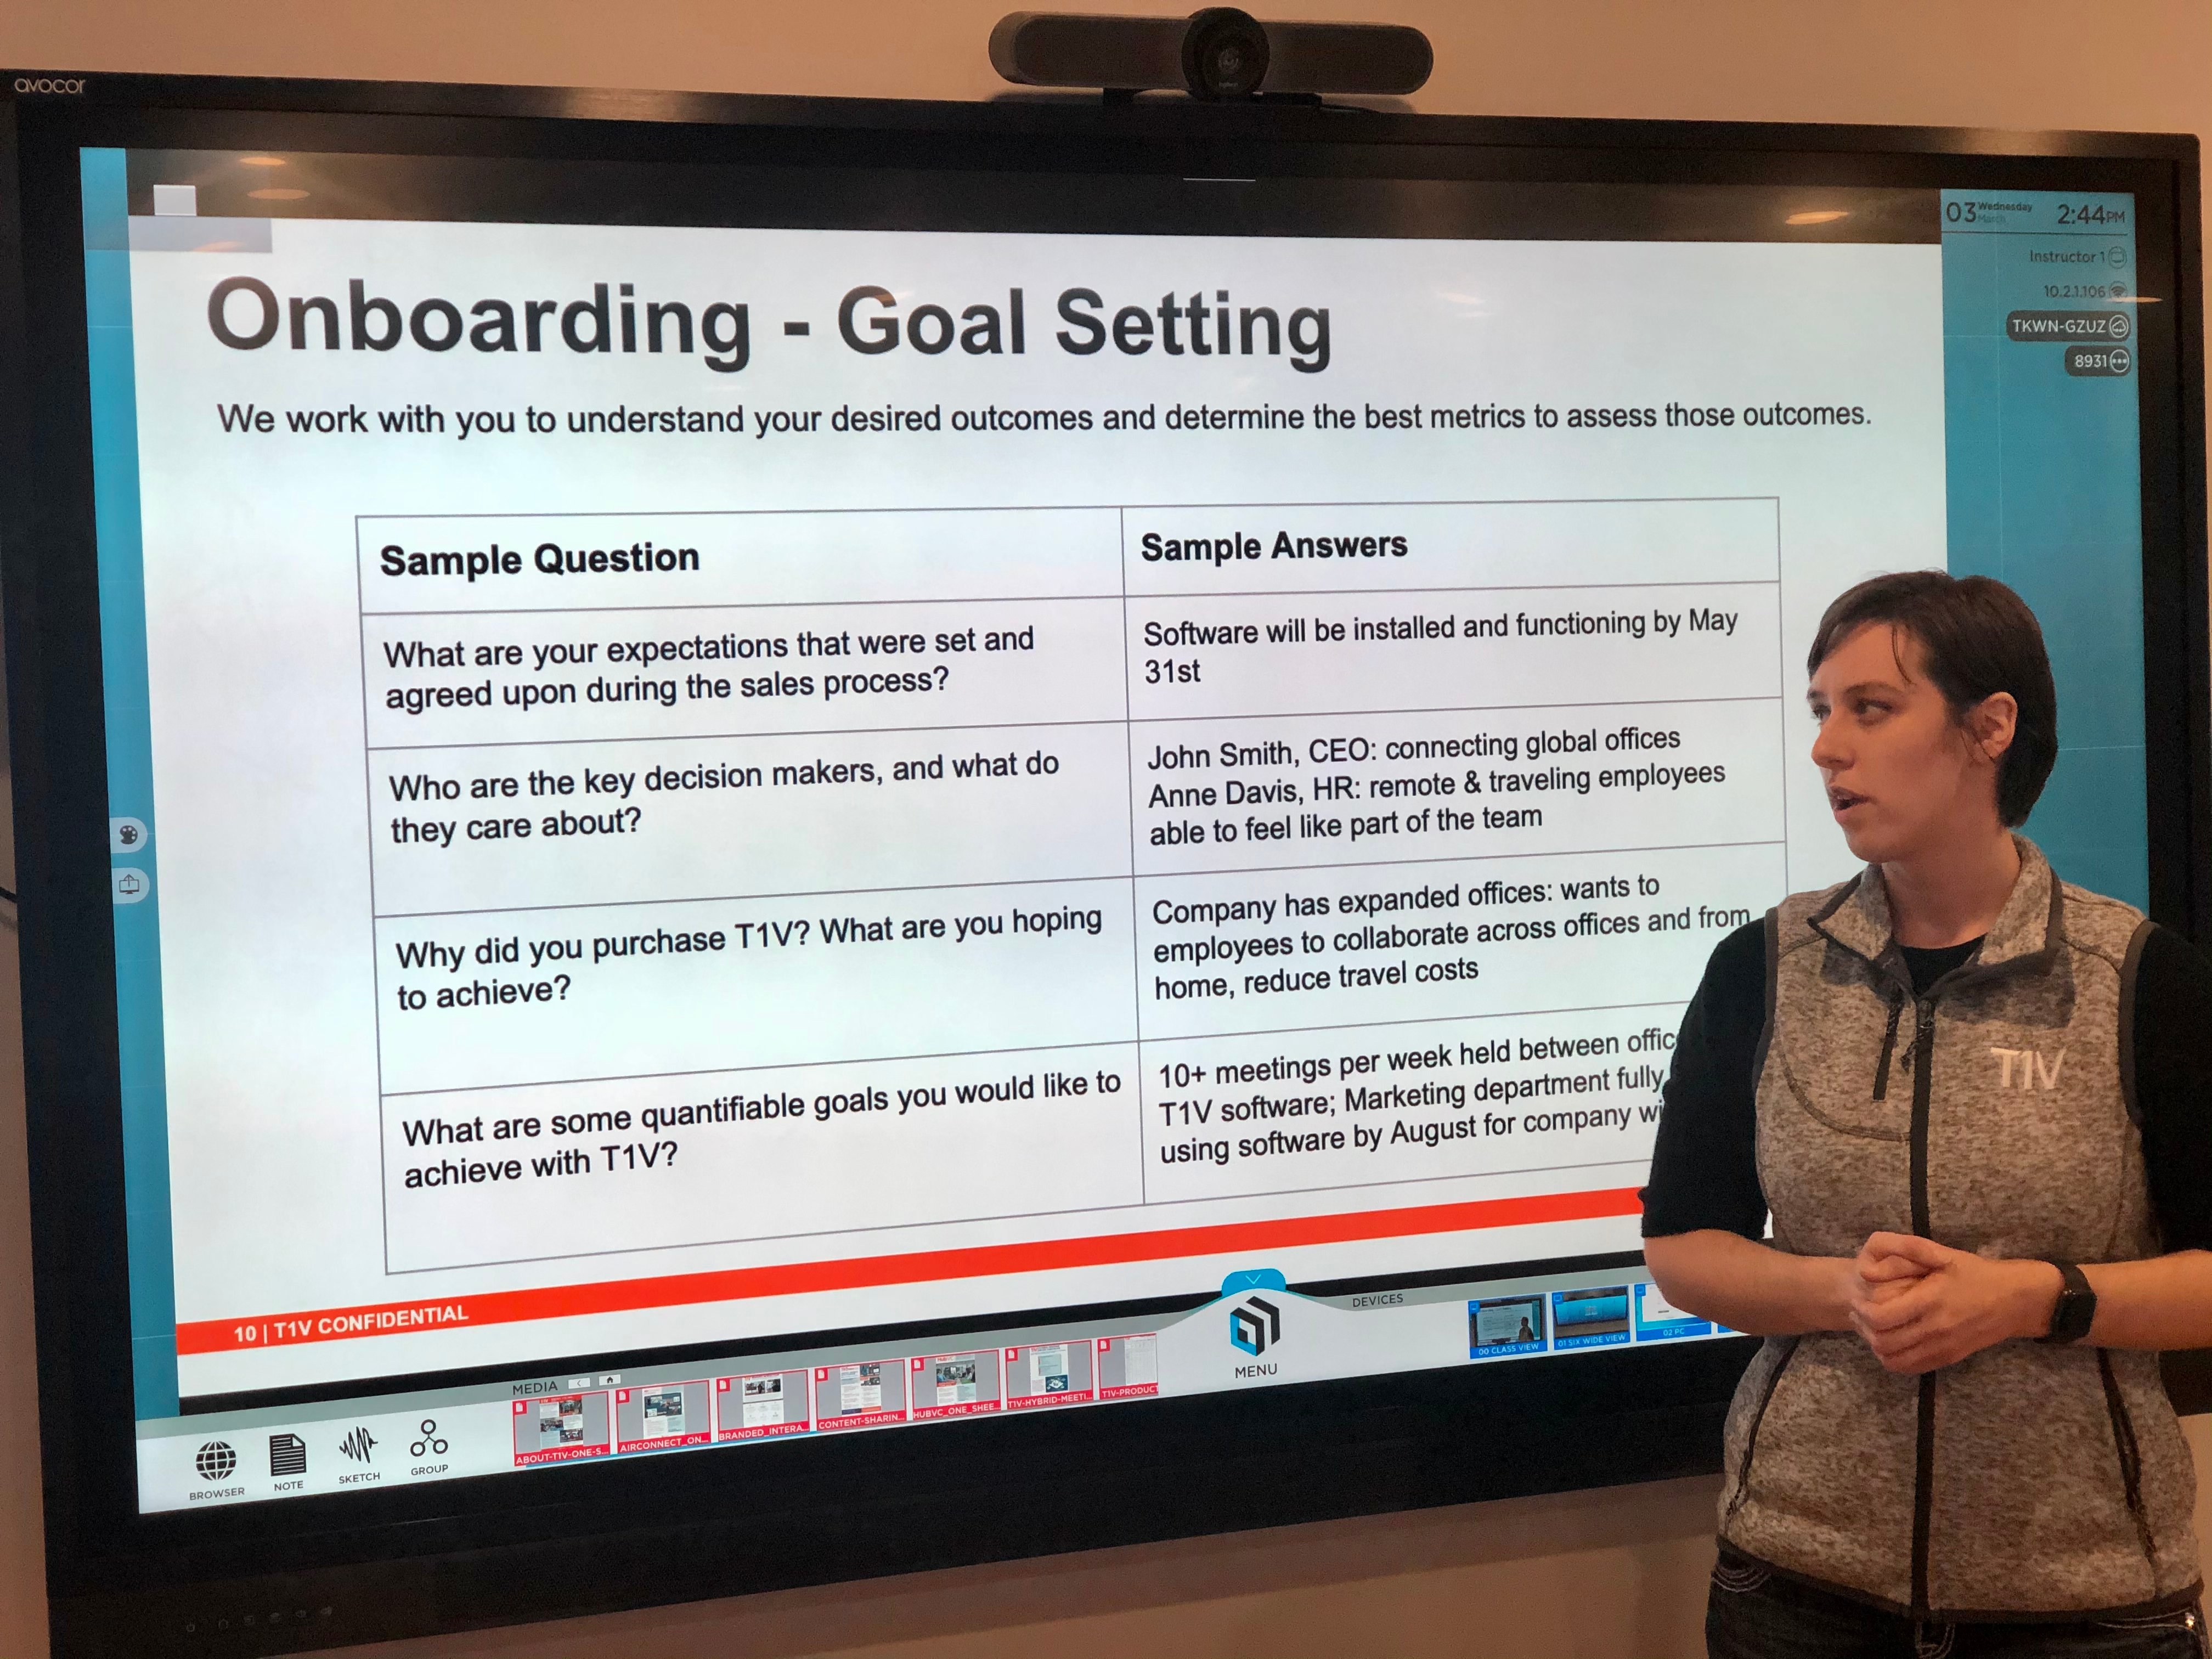 t1v-in-3-onboarding-and-goal-setting-with-t1v